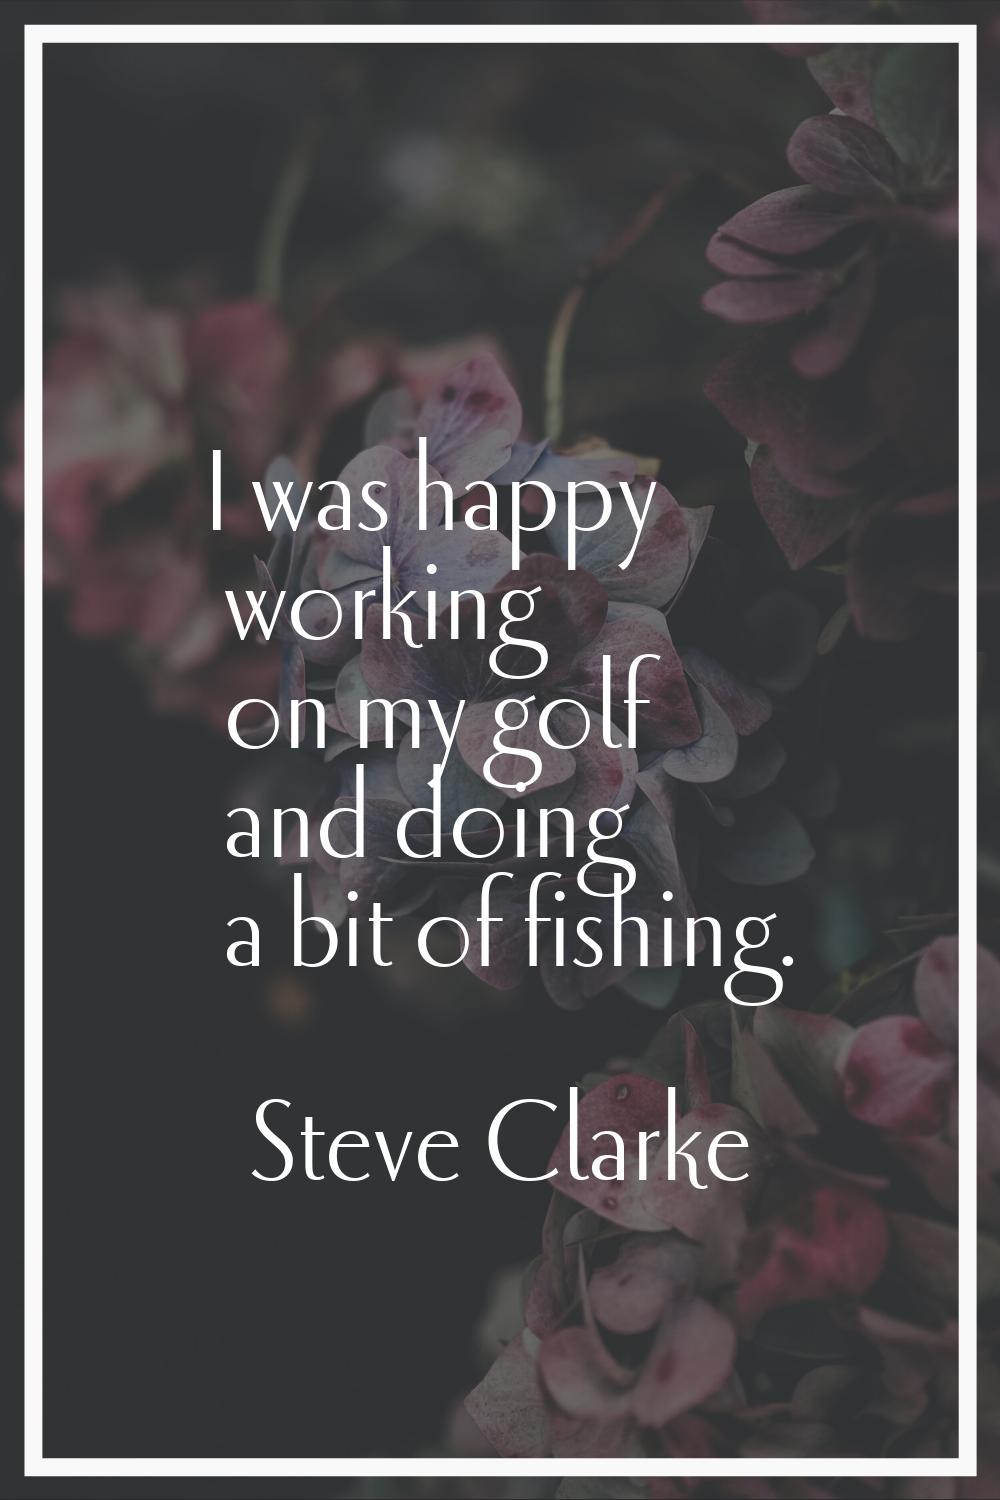 I was happy working on my golf and doing a bit of fishing.